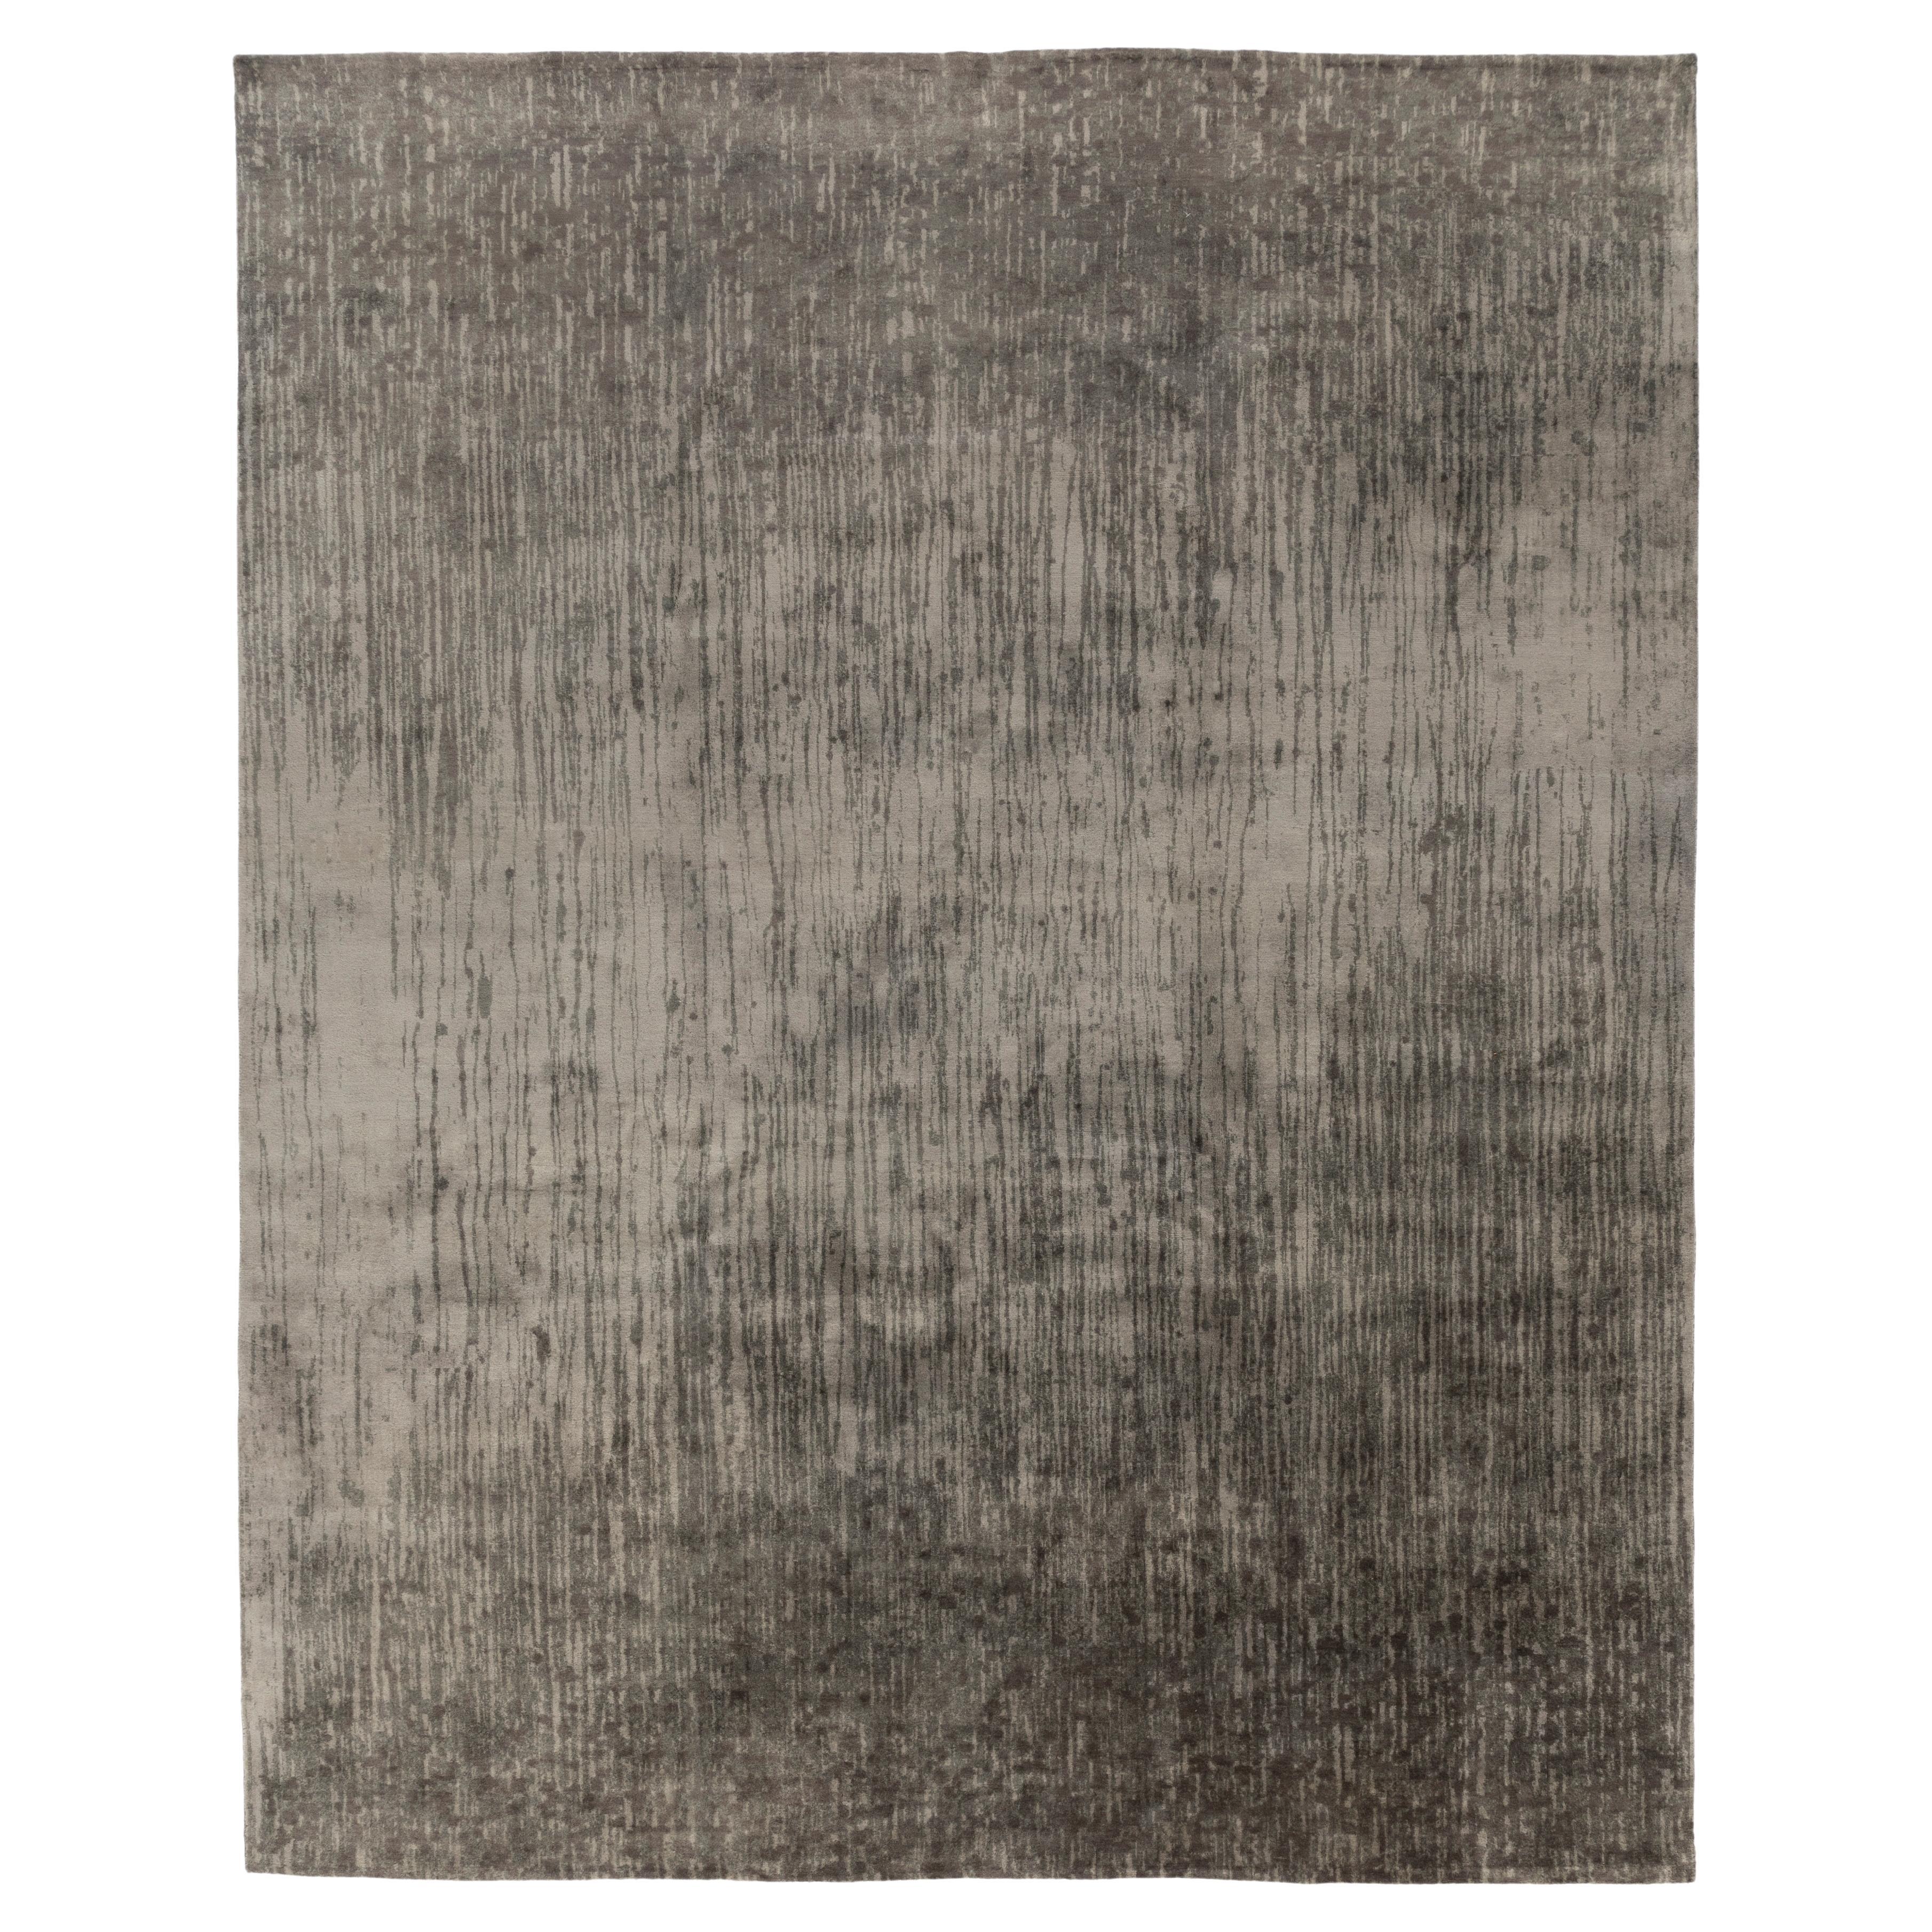 Tufenkian Carpets, Waterfall Charcoal, Contemporary/Modern, Greys For Sale